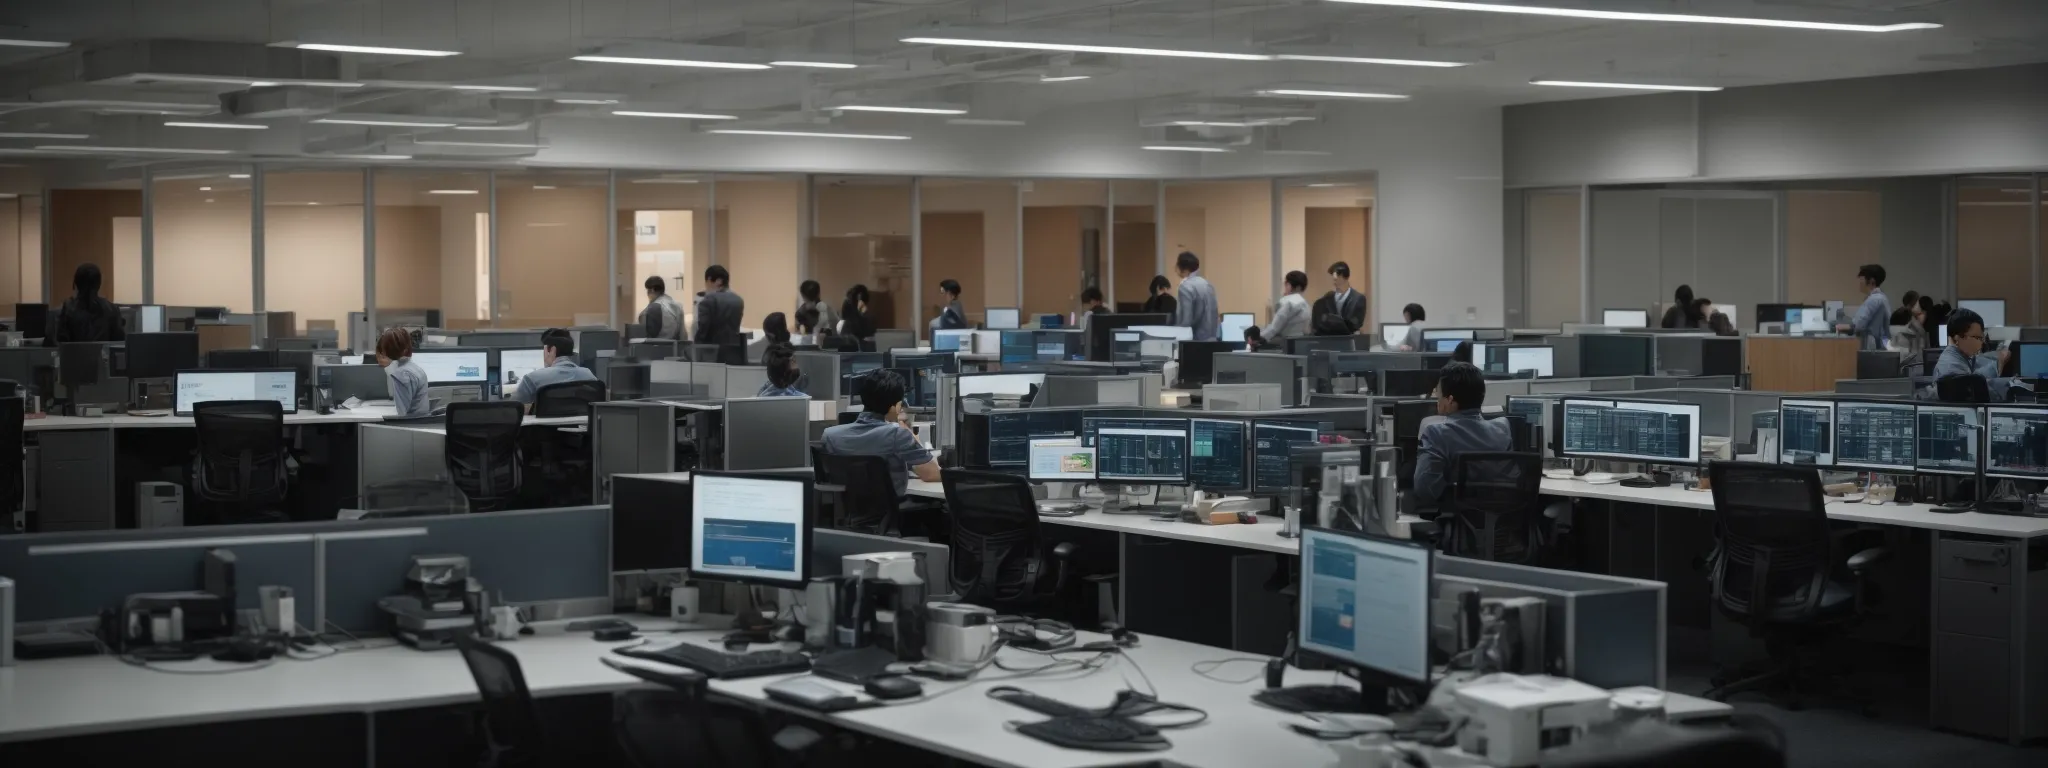 a modern office setting with clusters of computer workstations where customer support agents are engaging with various software on multiple screens.